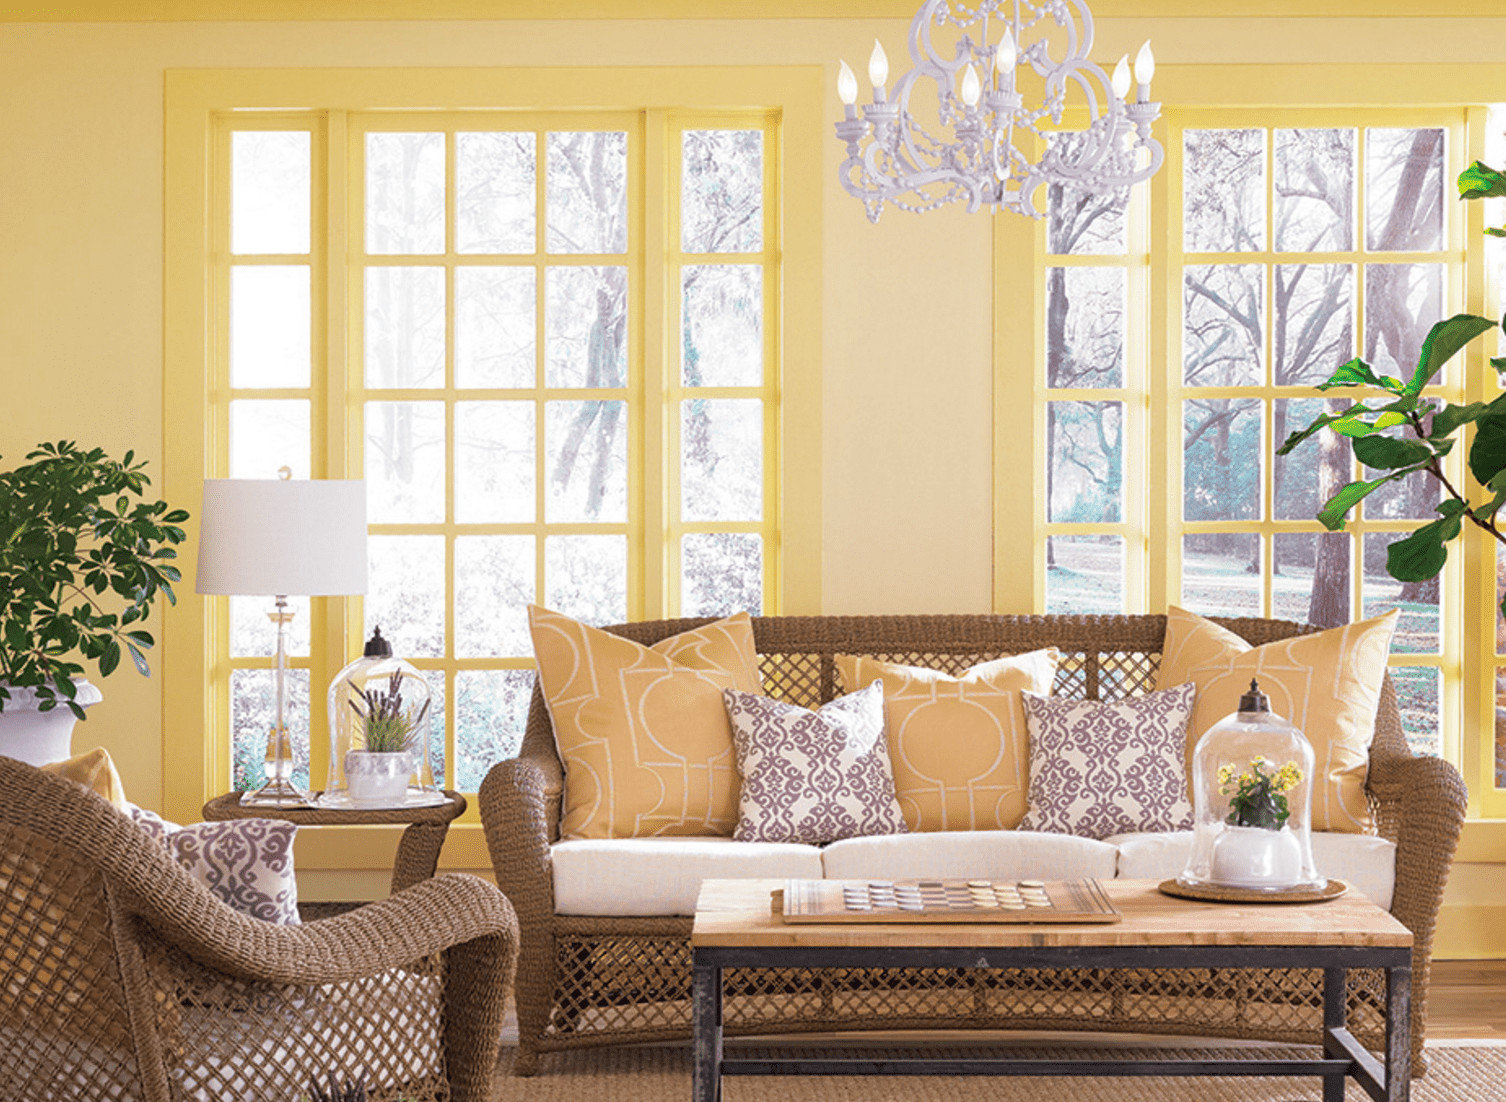 Paint Color For Living Room
 11 Best Neutral Paint Colors for Your Home